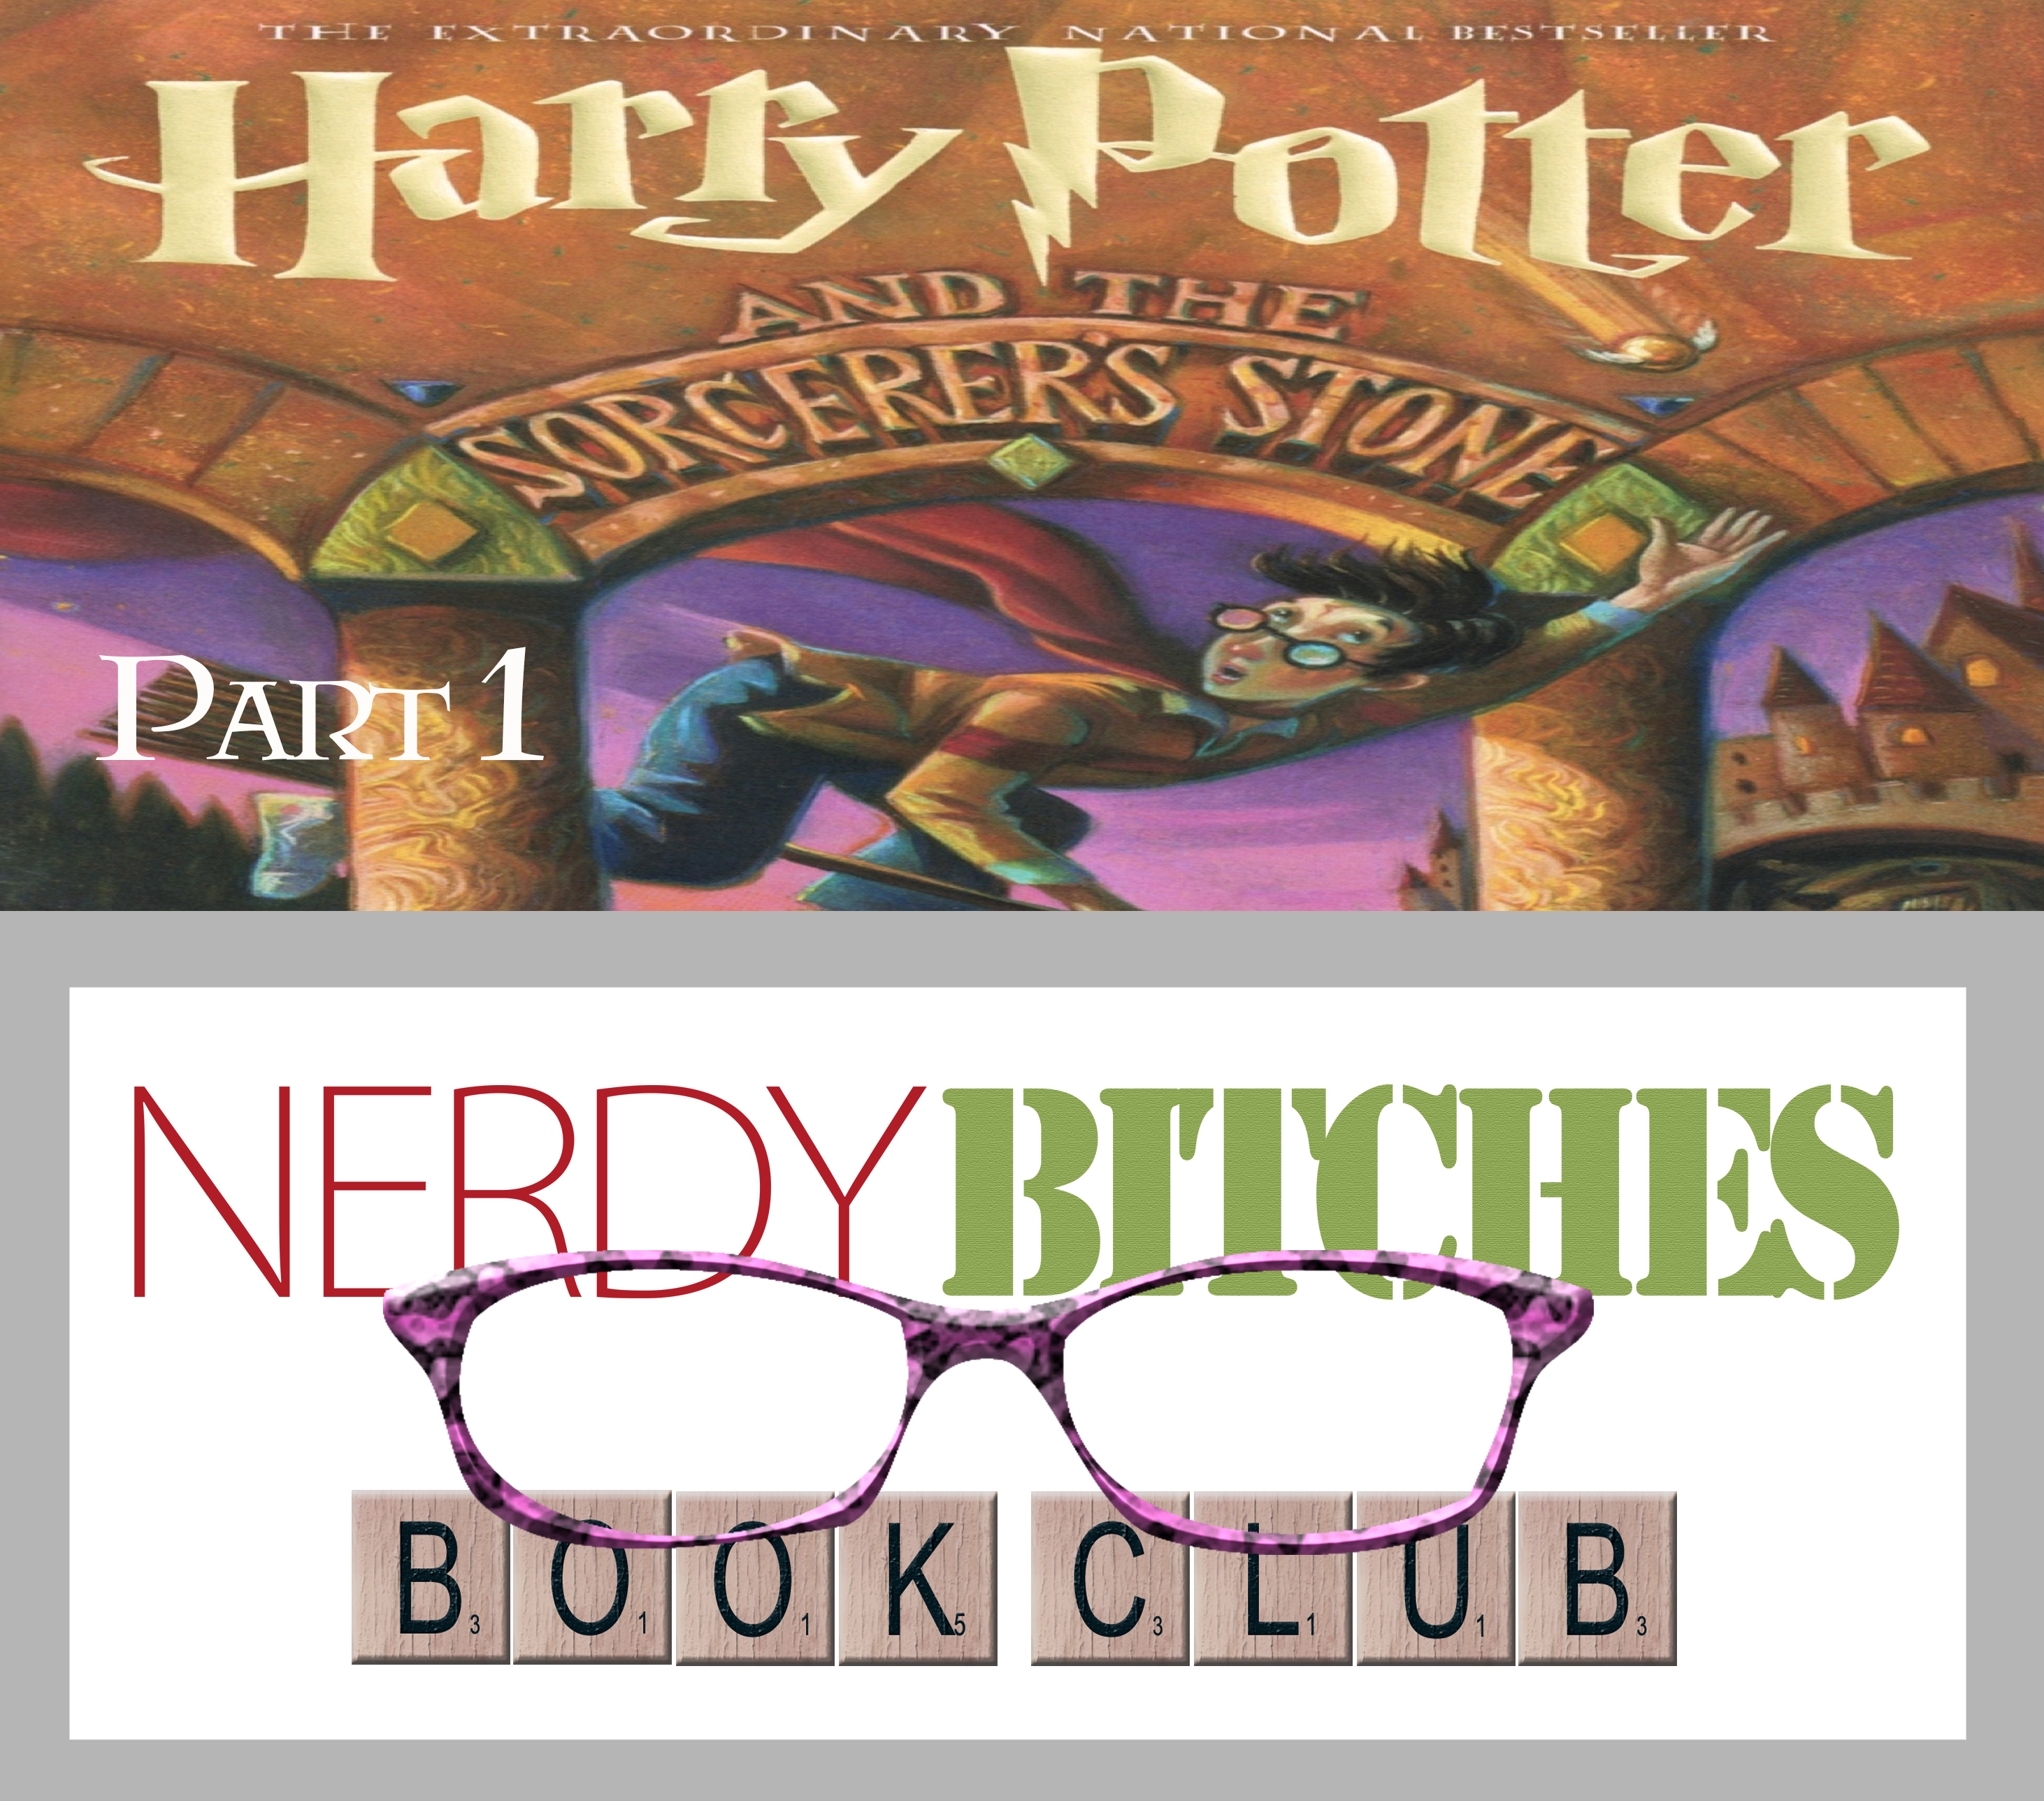 Harry Potter and the Sorcerer's Stone Part 1